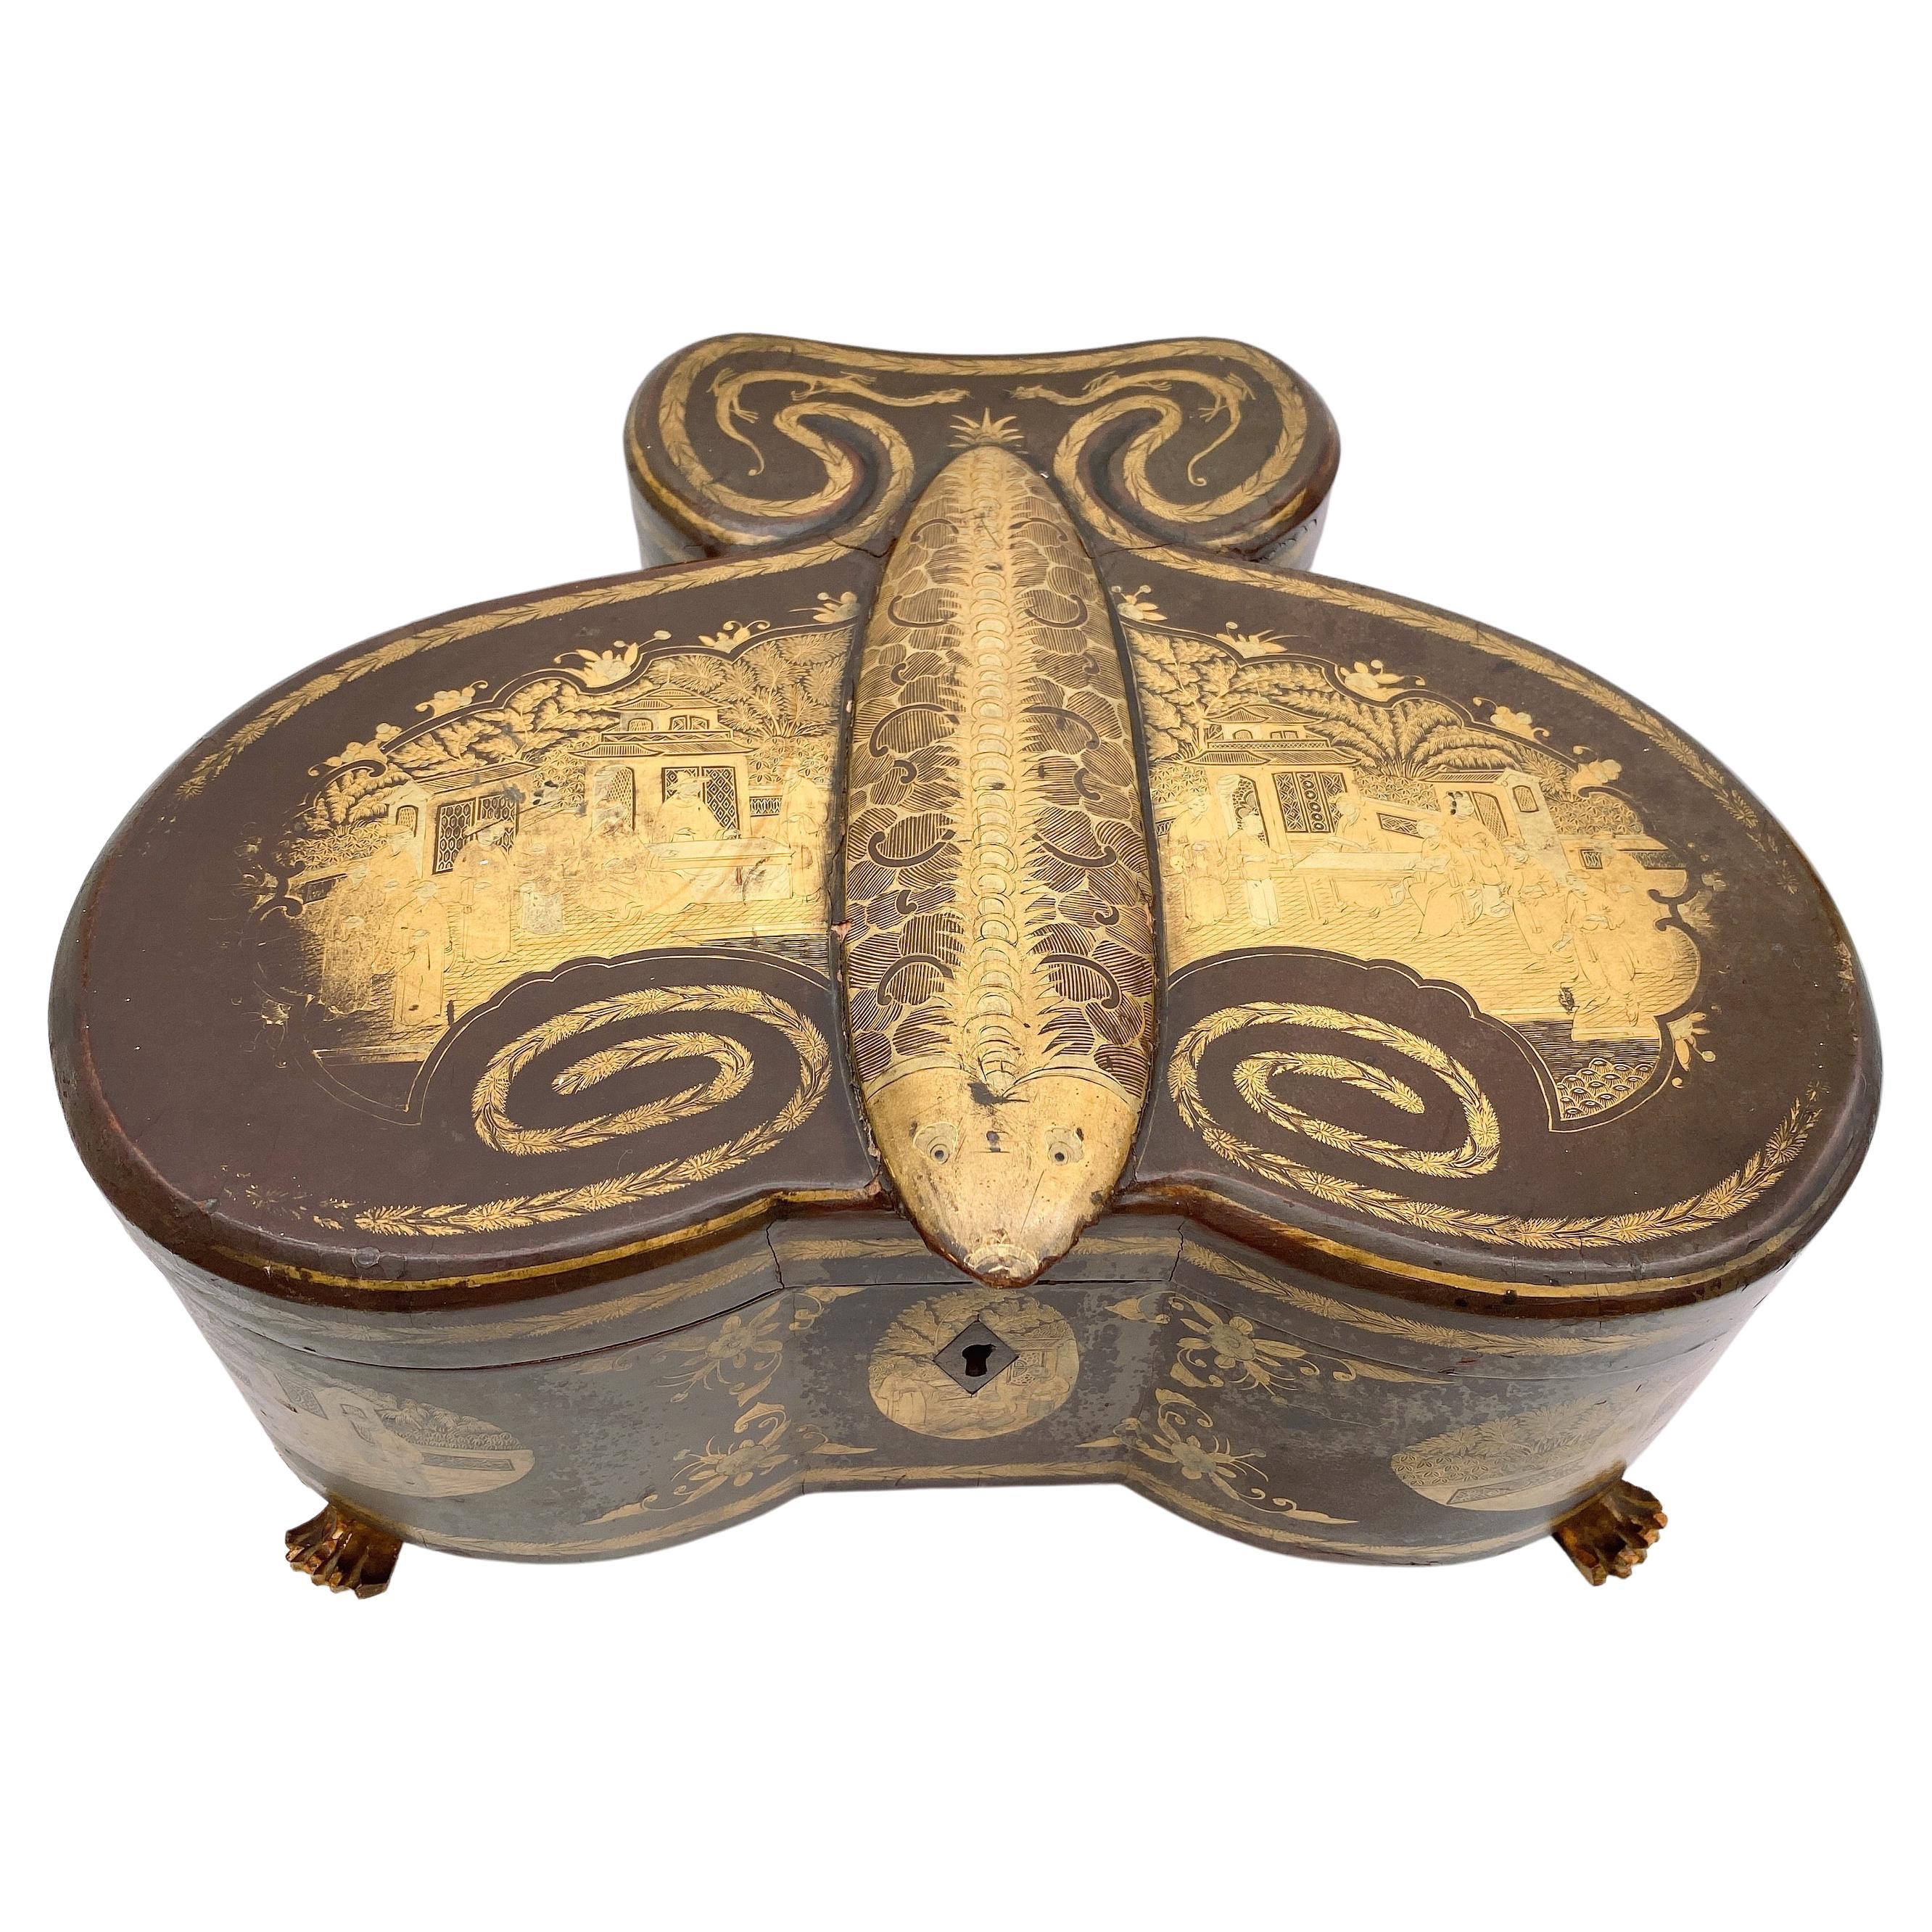 Rare 19th Century Antique Chinese Gilt Lacquer Butterfly Cased Pewter Tea Caddy For Sale